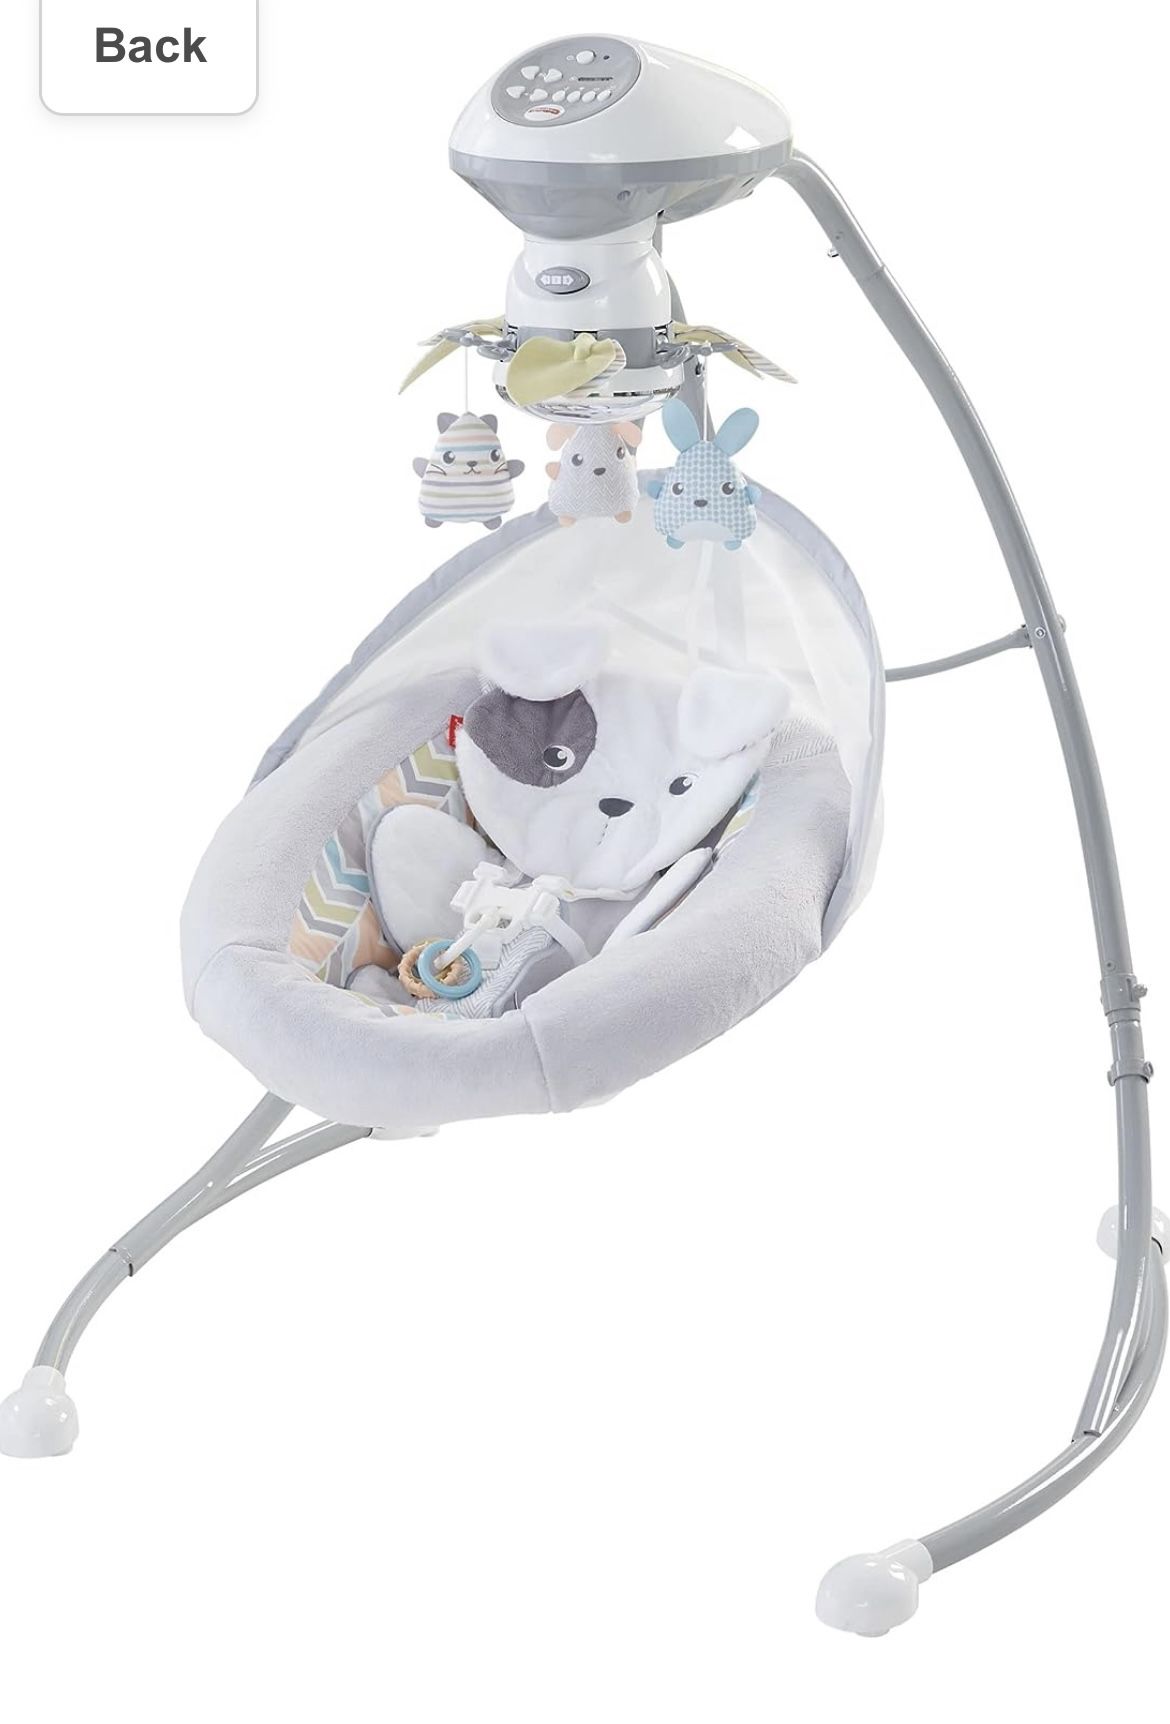 Baby Swing Fisher-Price Sweet Snugapuppy Dreams Deluxe 